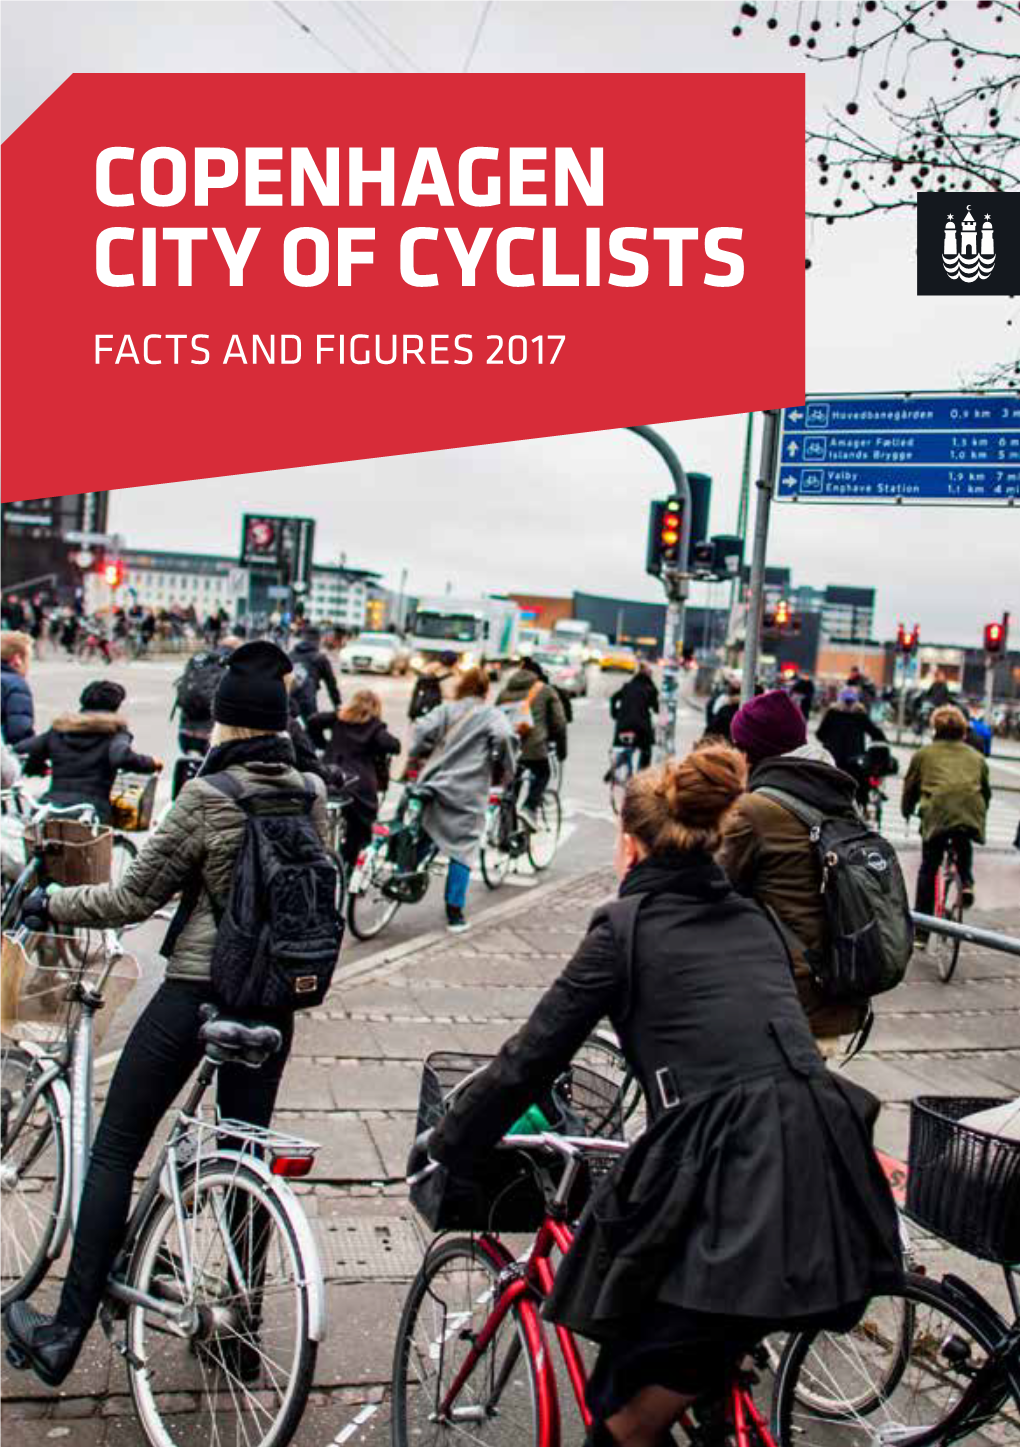 Copenhagen City of Cyclists Facts and Figures 2017